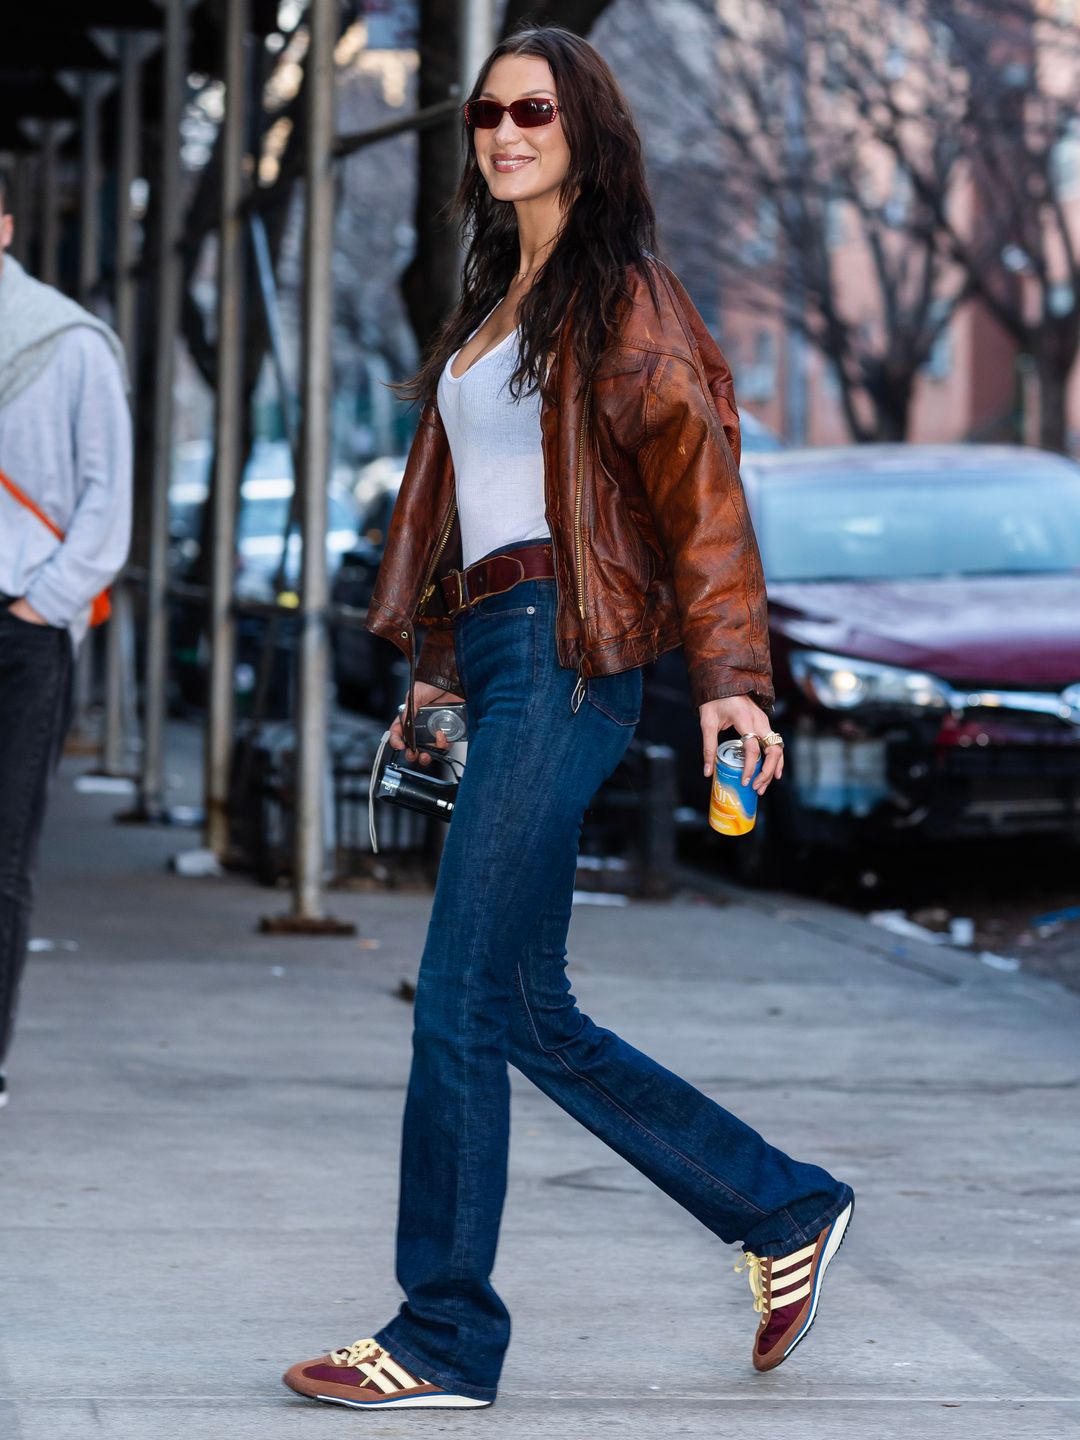 Bella Hadid visits the LES Girls Club wearing Adidas sneakers in brown and yellow